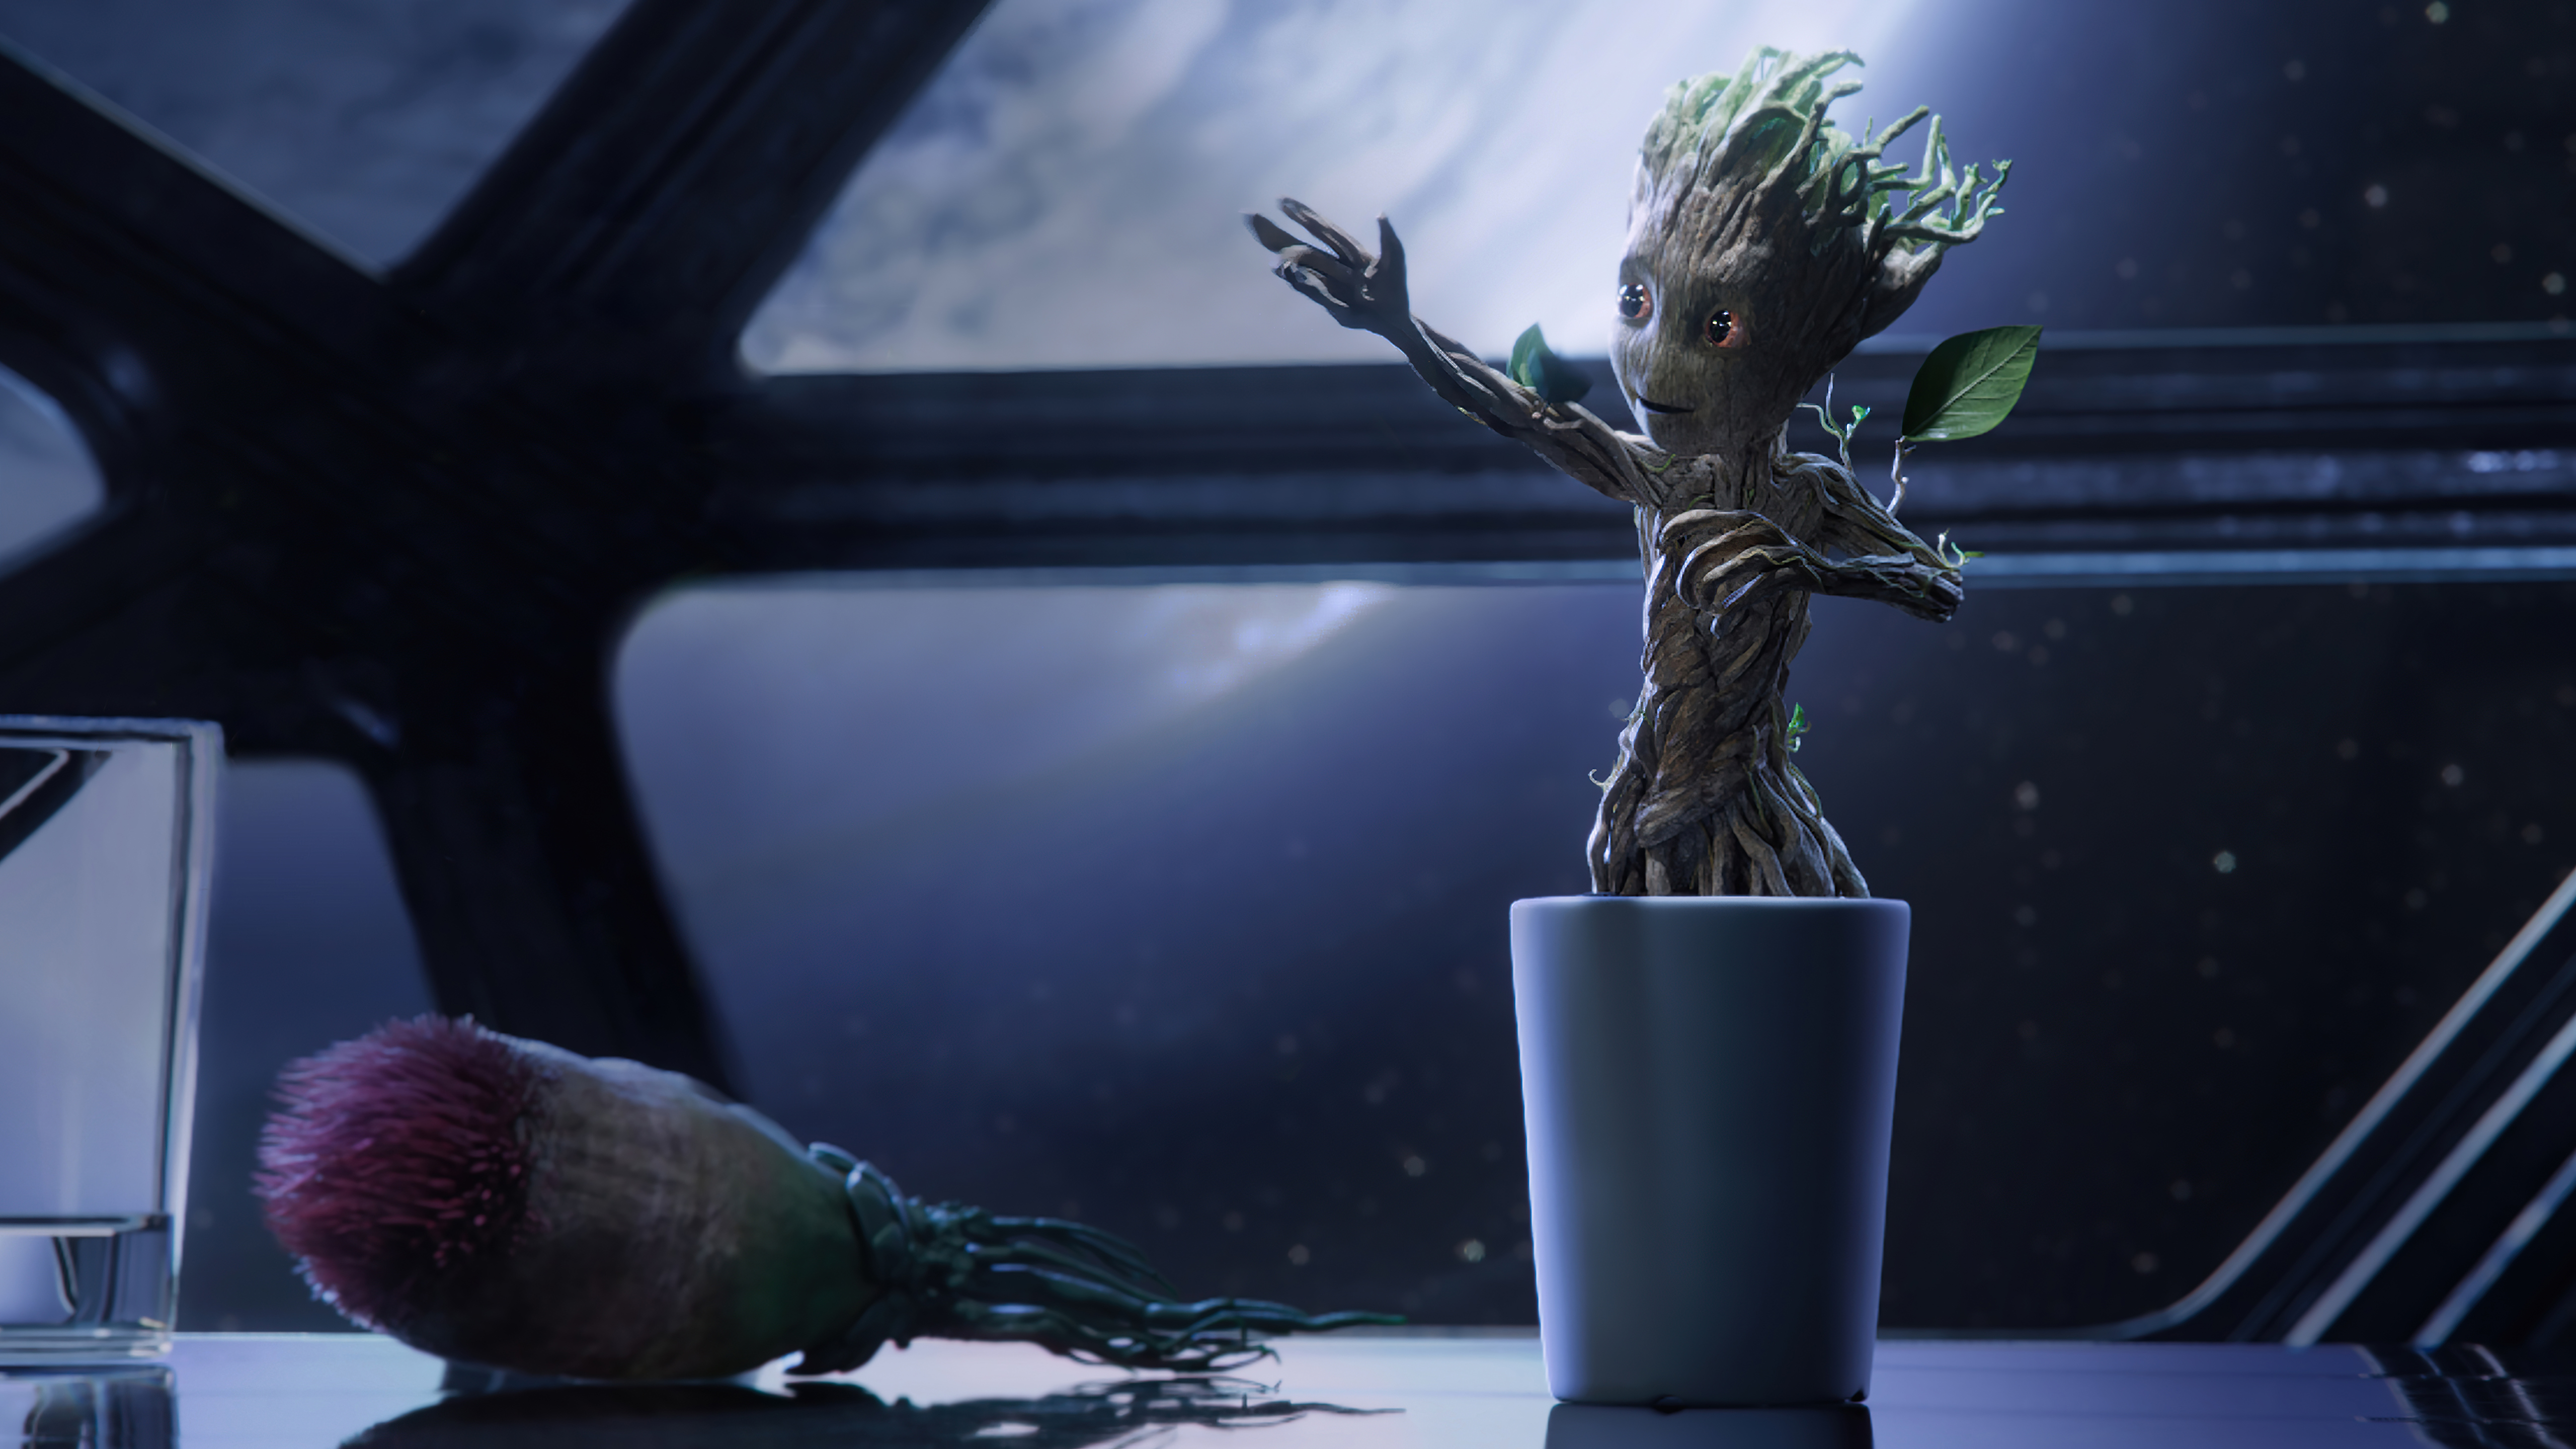 Baby Groot from the TV show I Am Groot is featured in this high-definition desktop wallpaper and background.